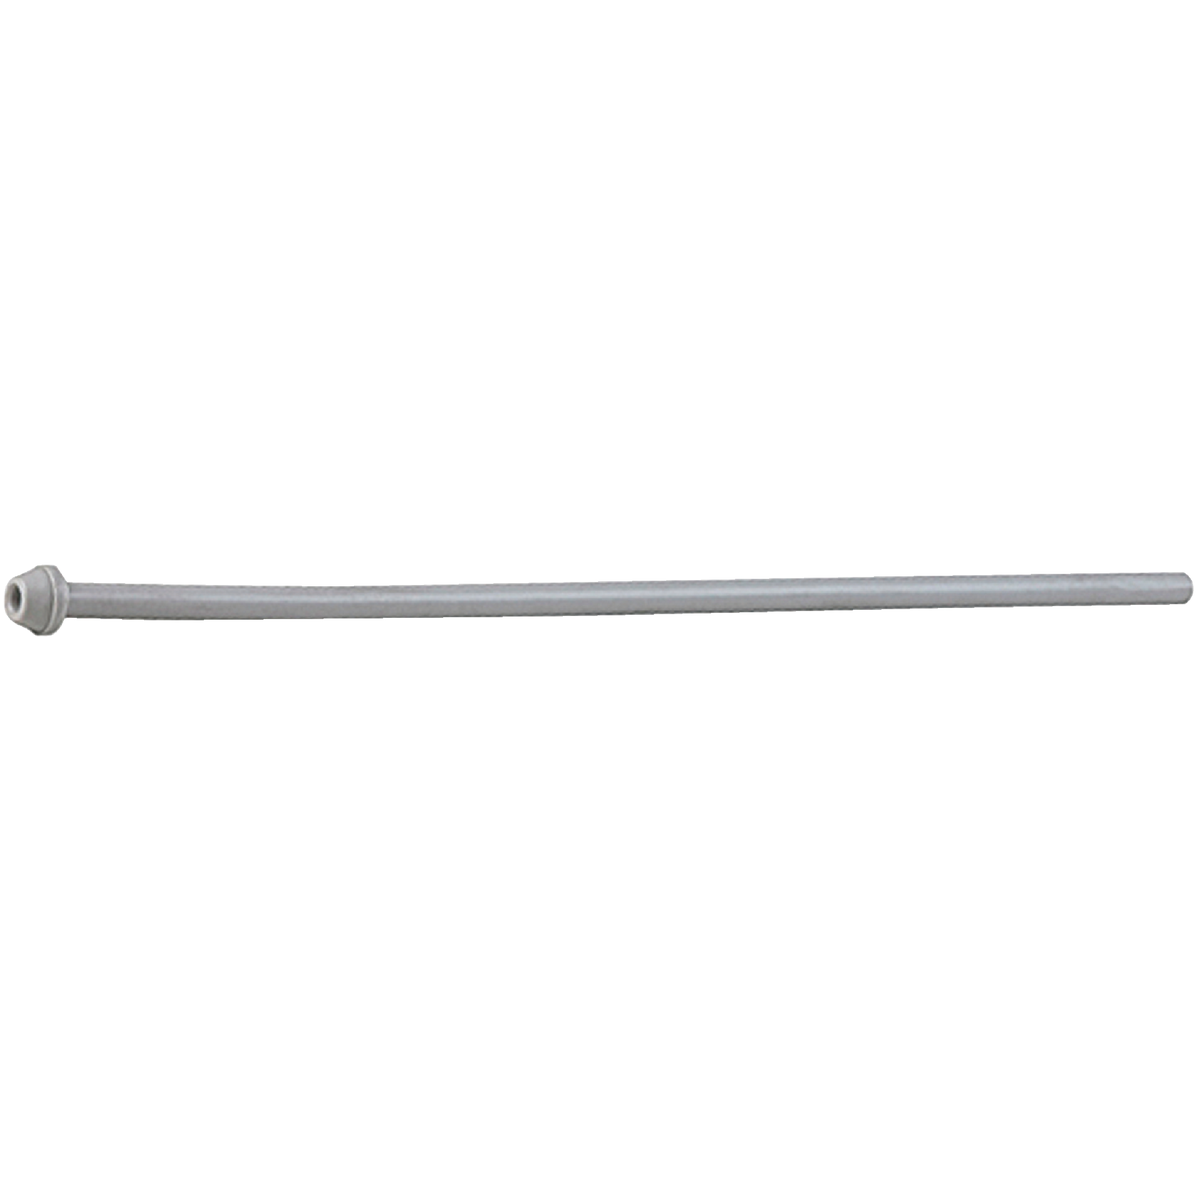 Faucet Supply Tube